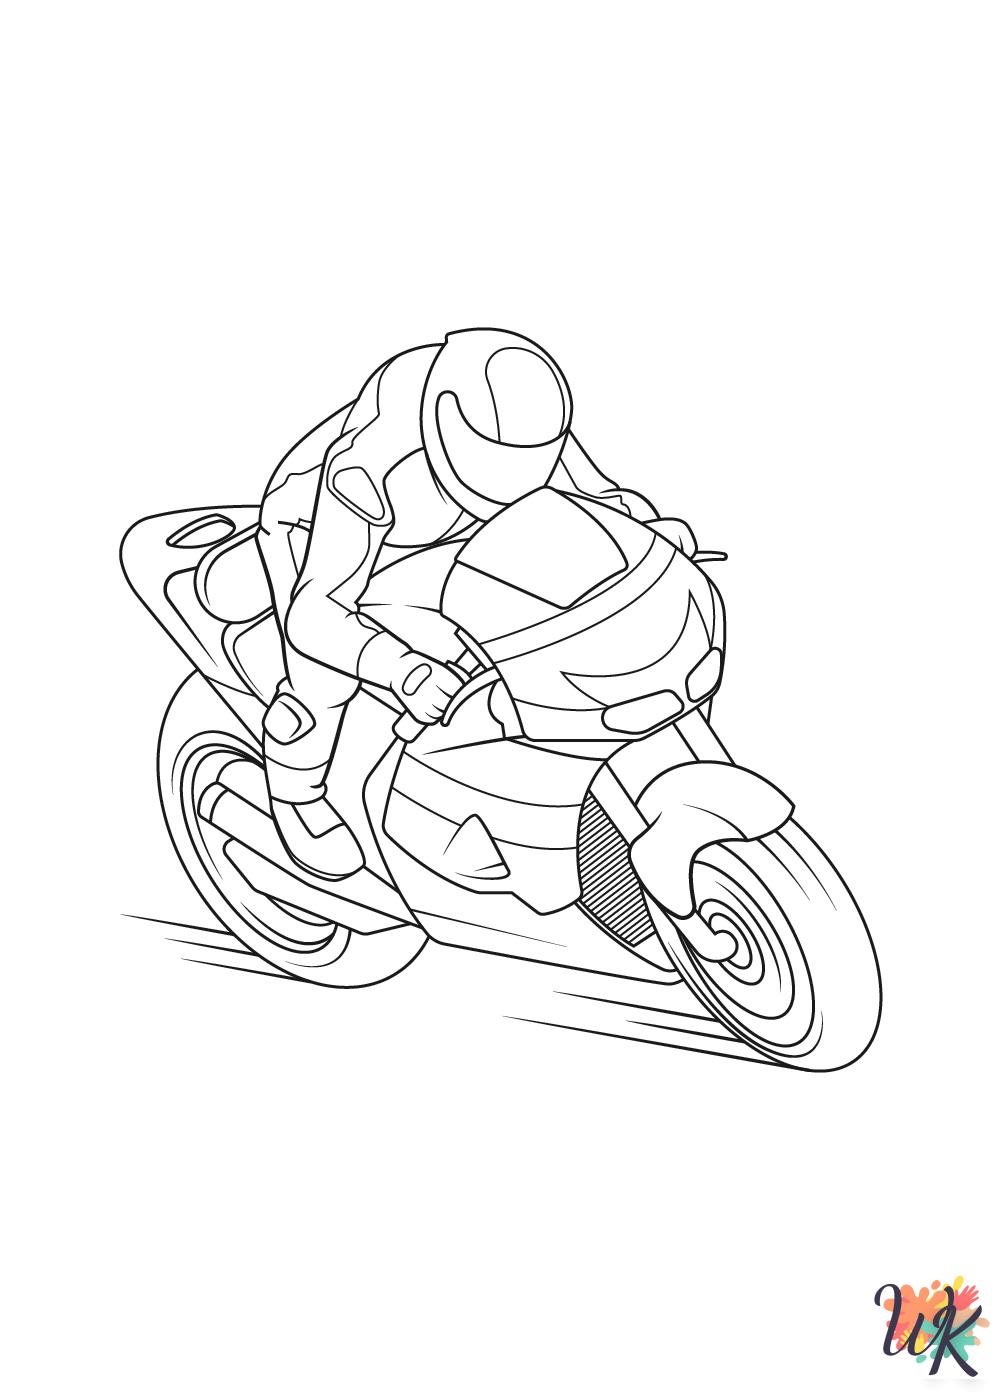 Motorcycle adult coloring pages 1